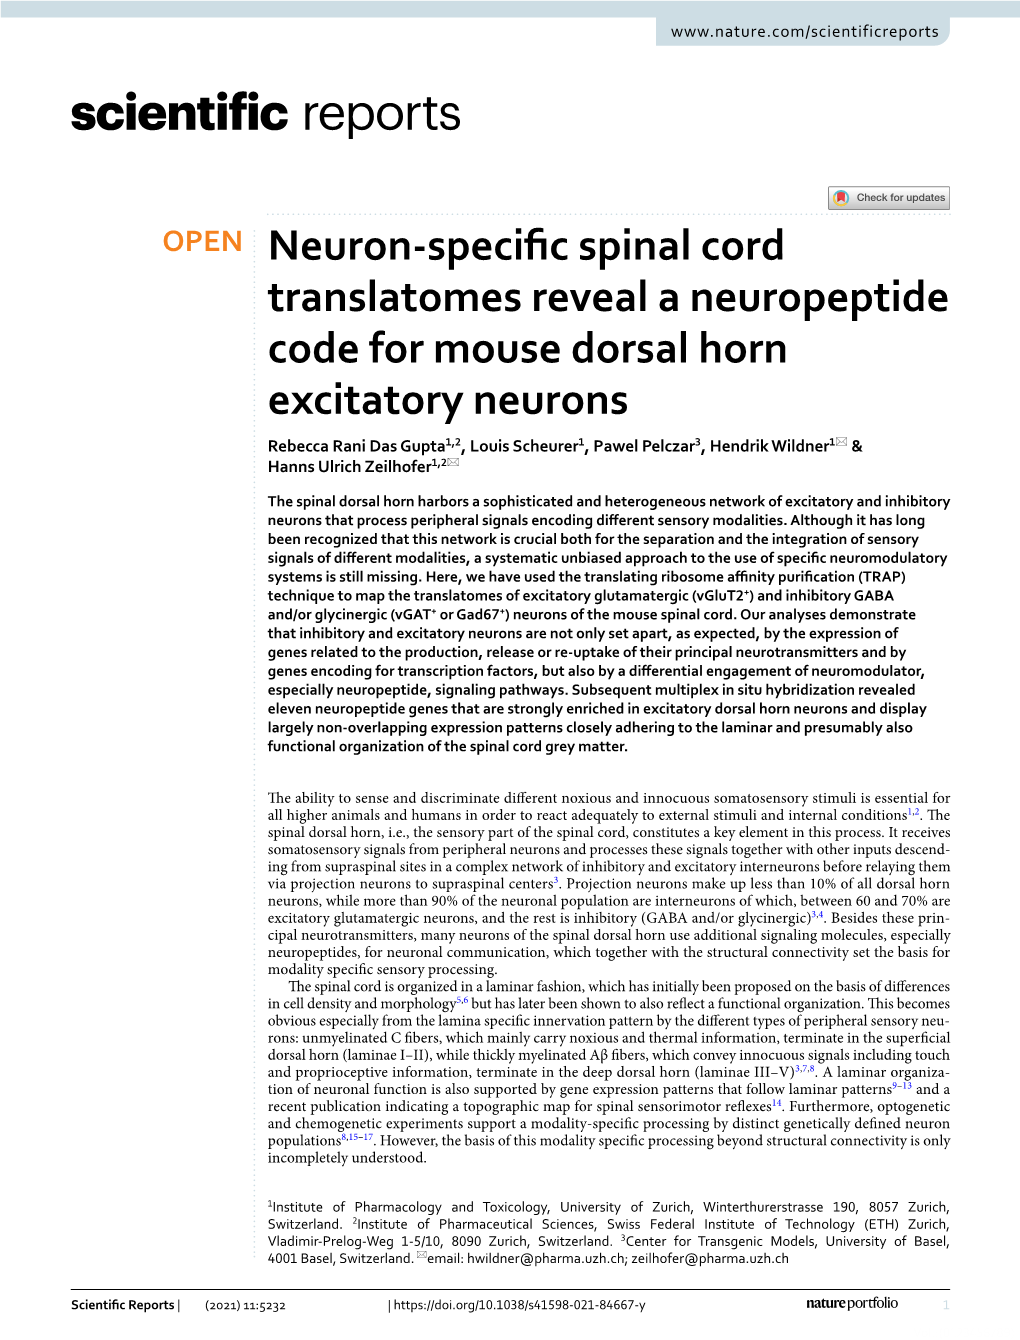 Neuron-Specific Spinal Cord Translatomes Reveal a Neuropeptide